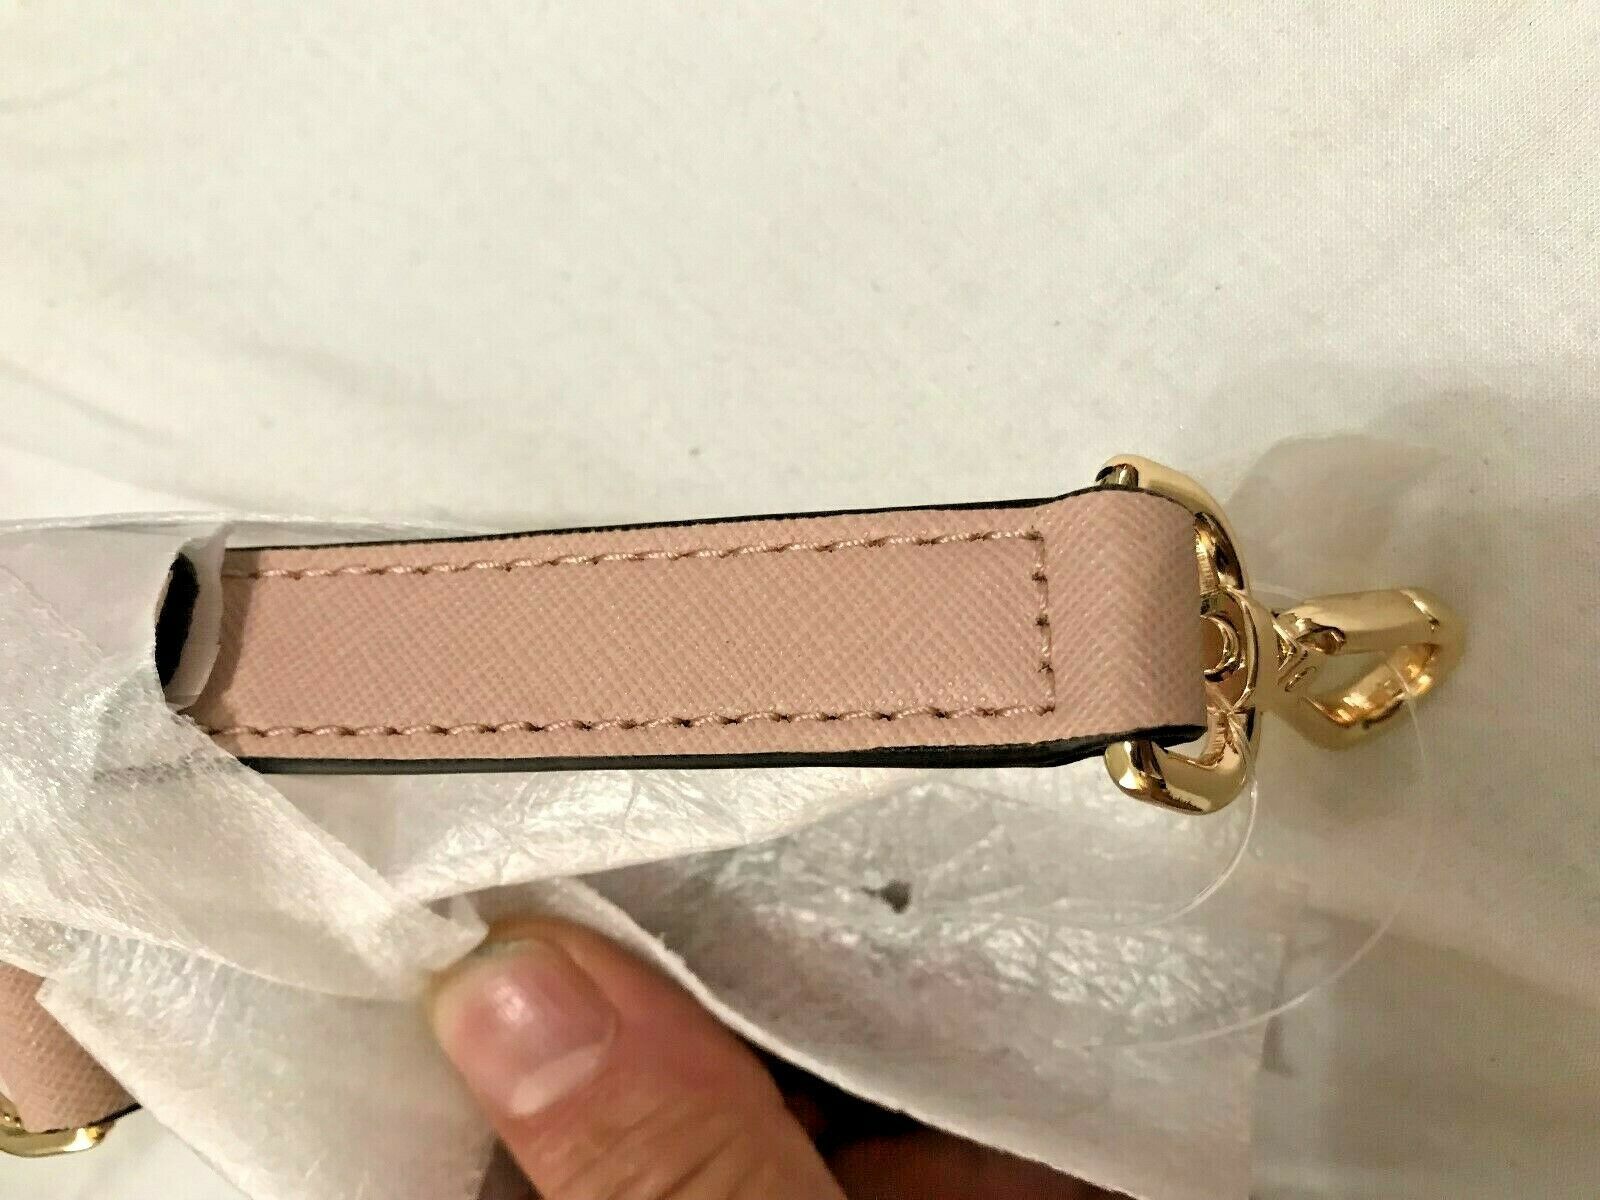 Michael Kors Purse Strap Replacement Netherlands, SAVE 60% 